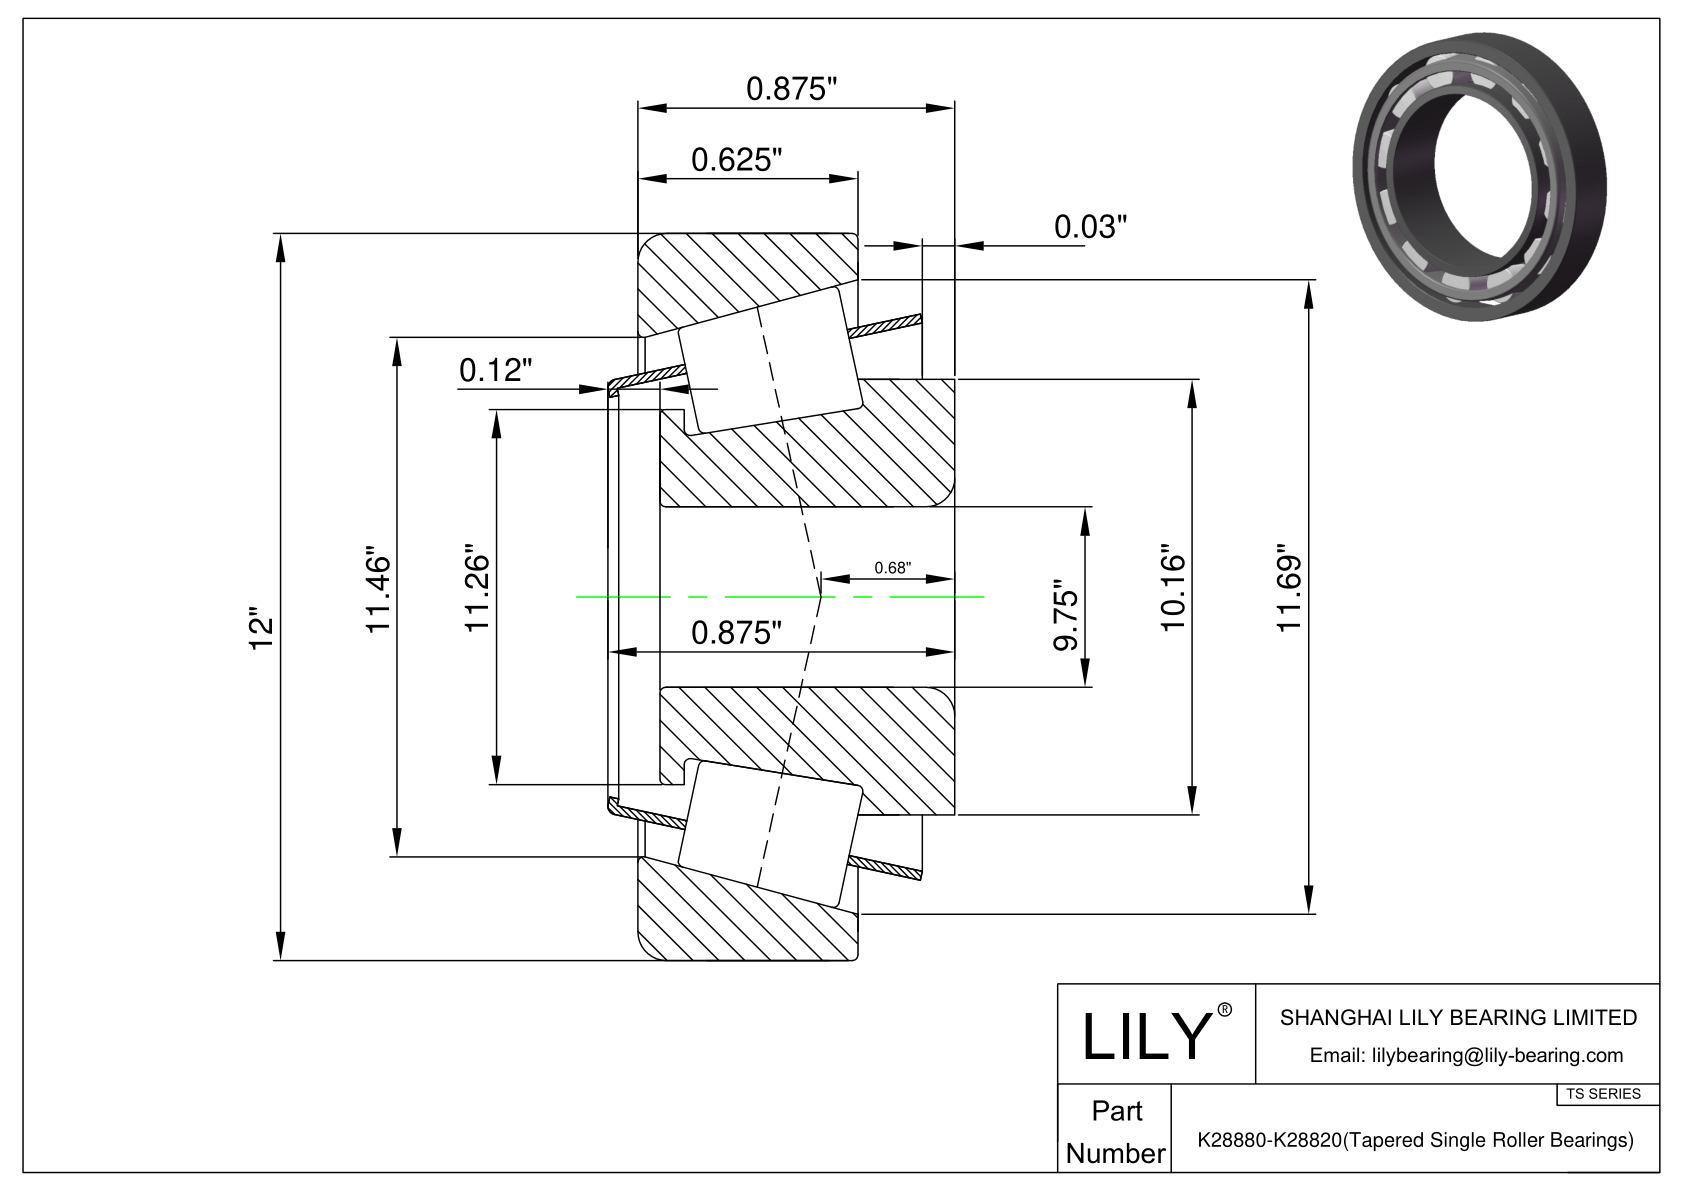 K28880-K28820 TS (Tapered Single Roller Bearings) (Imperial) cad drawing